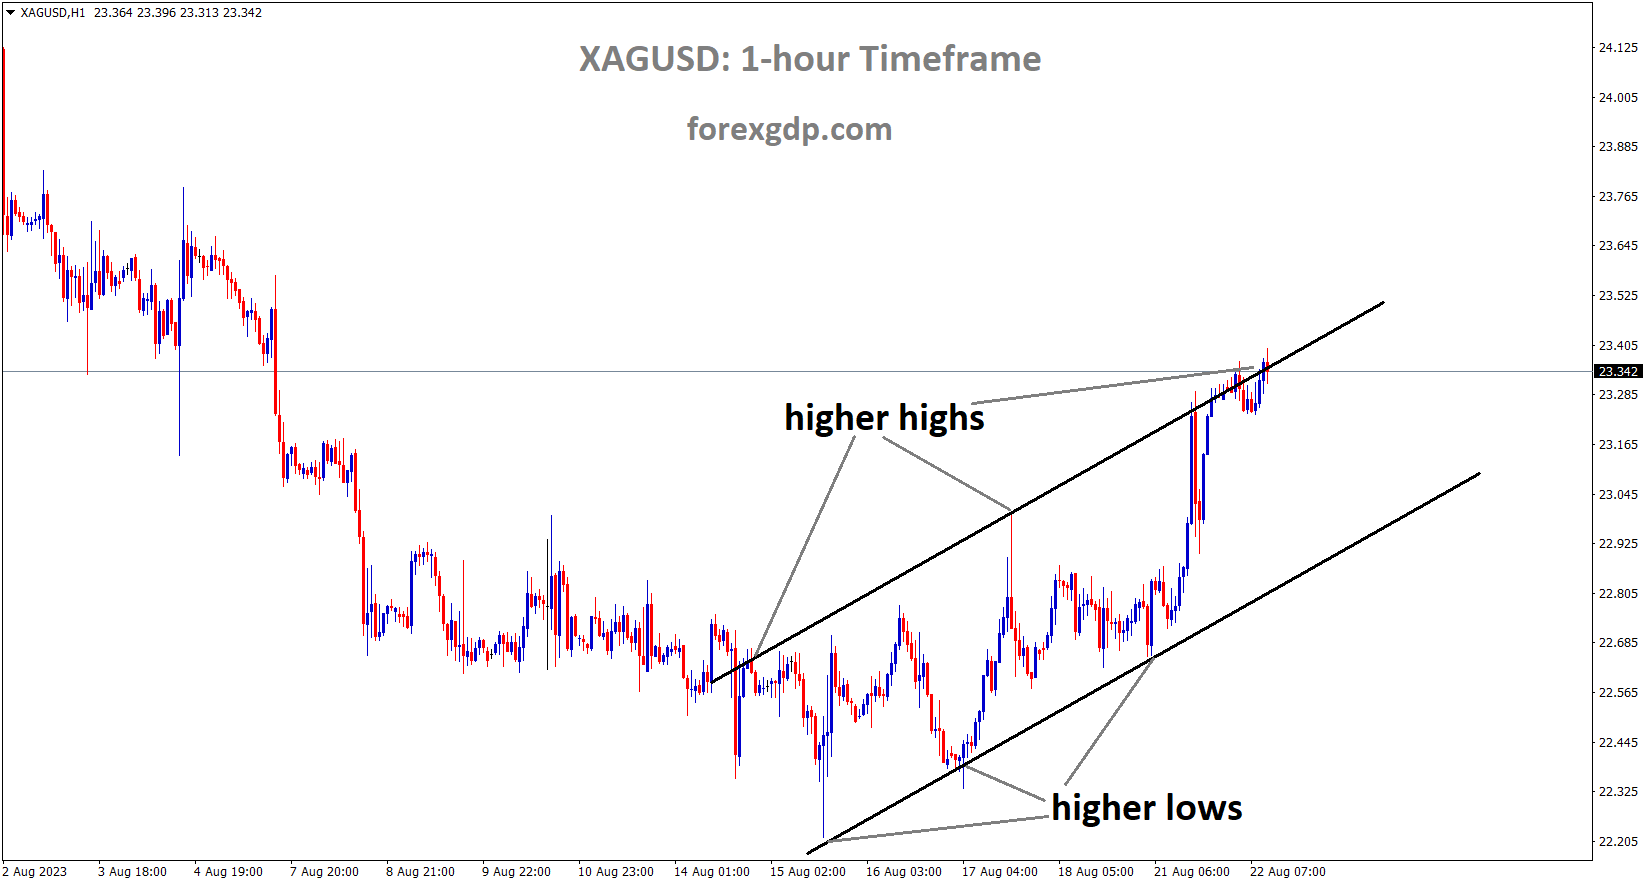 XAGUSD Silver price is moving in the Ascending channel and the market has reached the higher high area of the channel